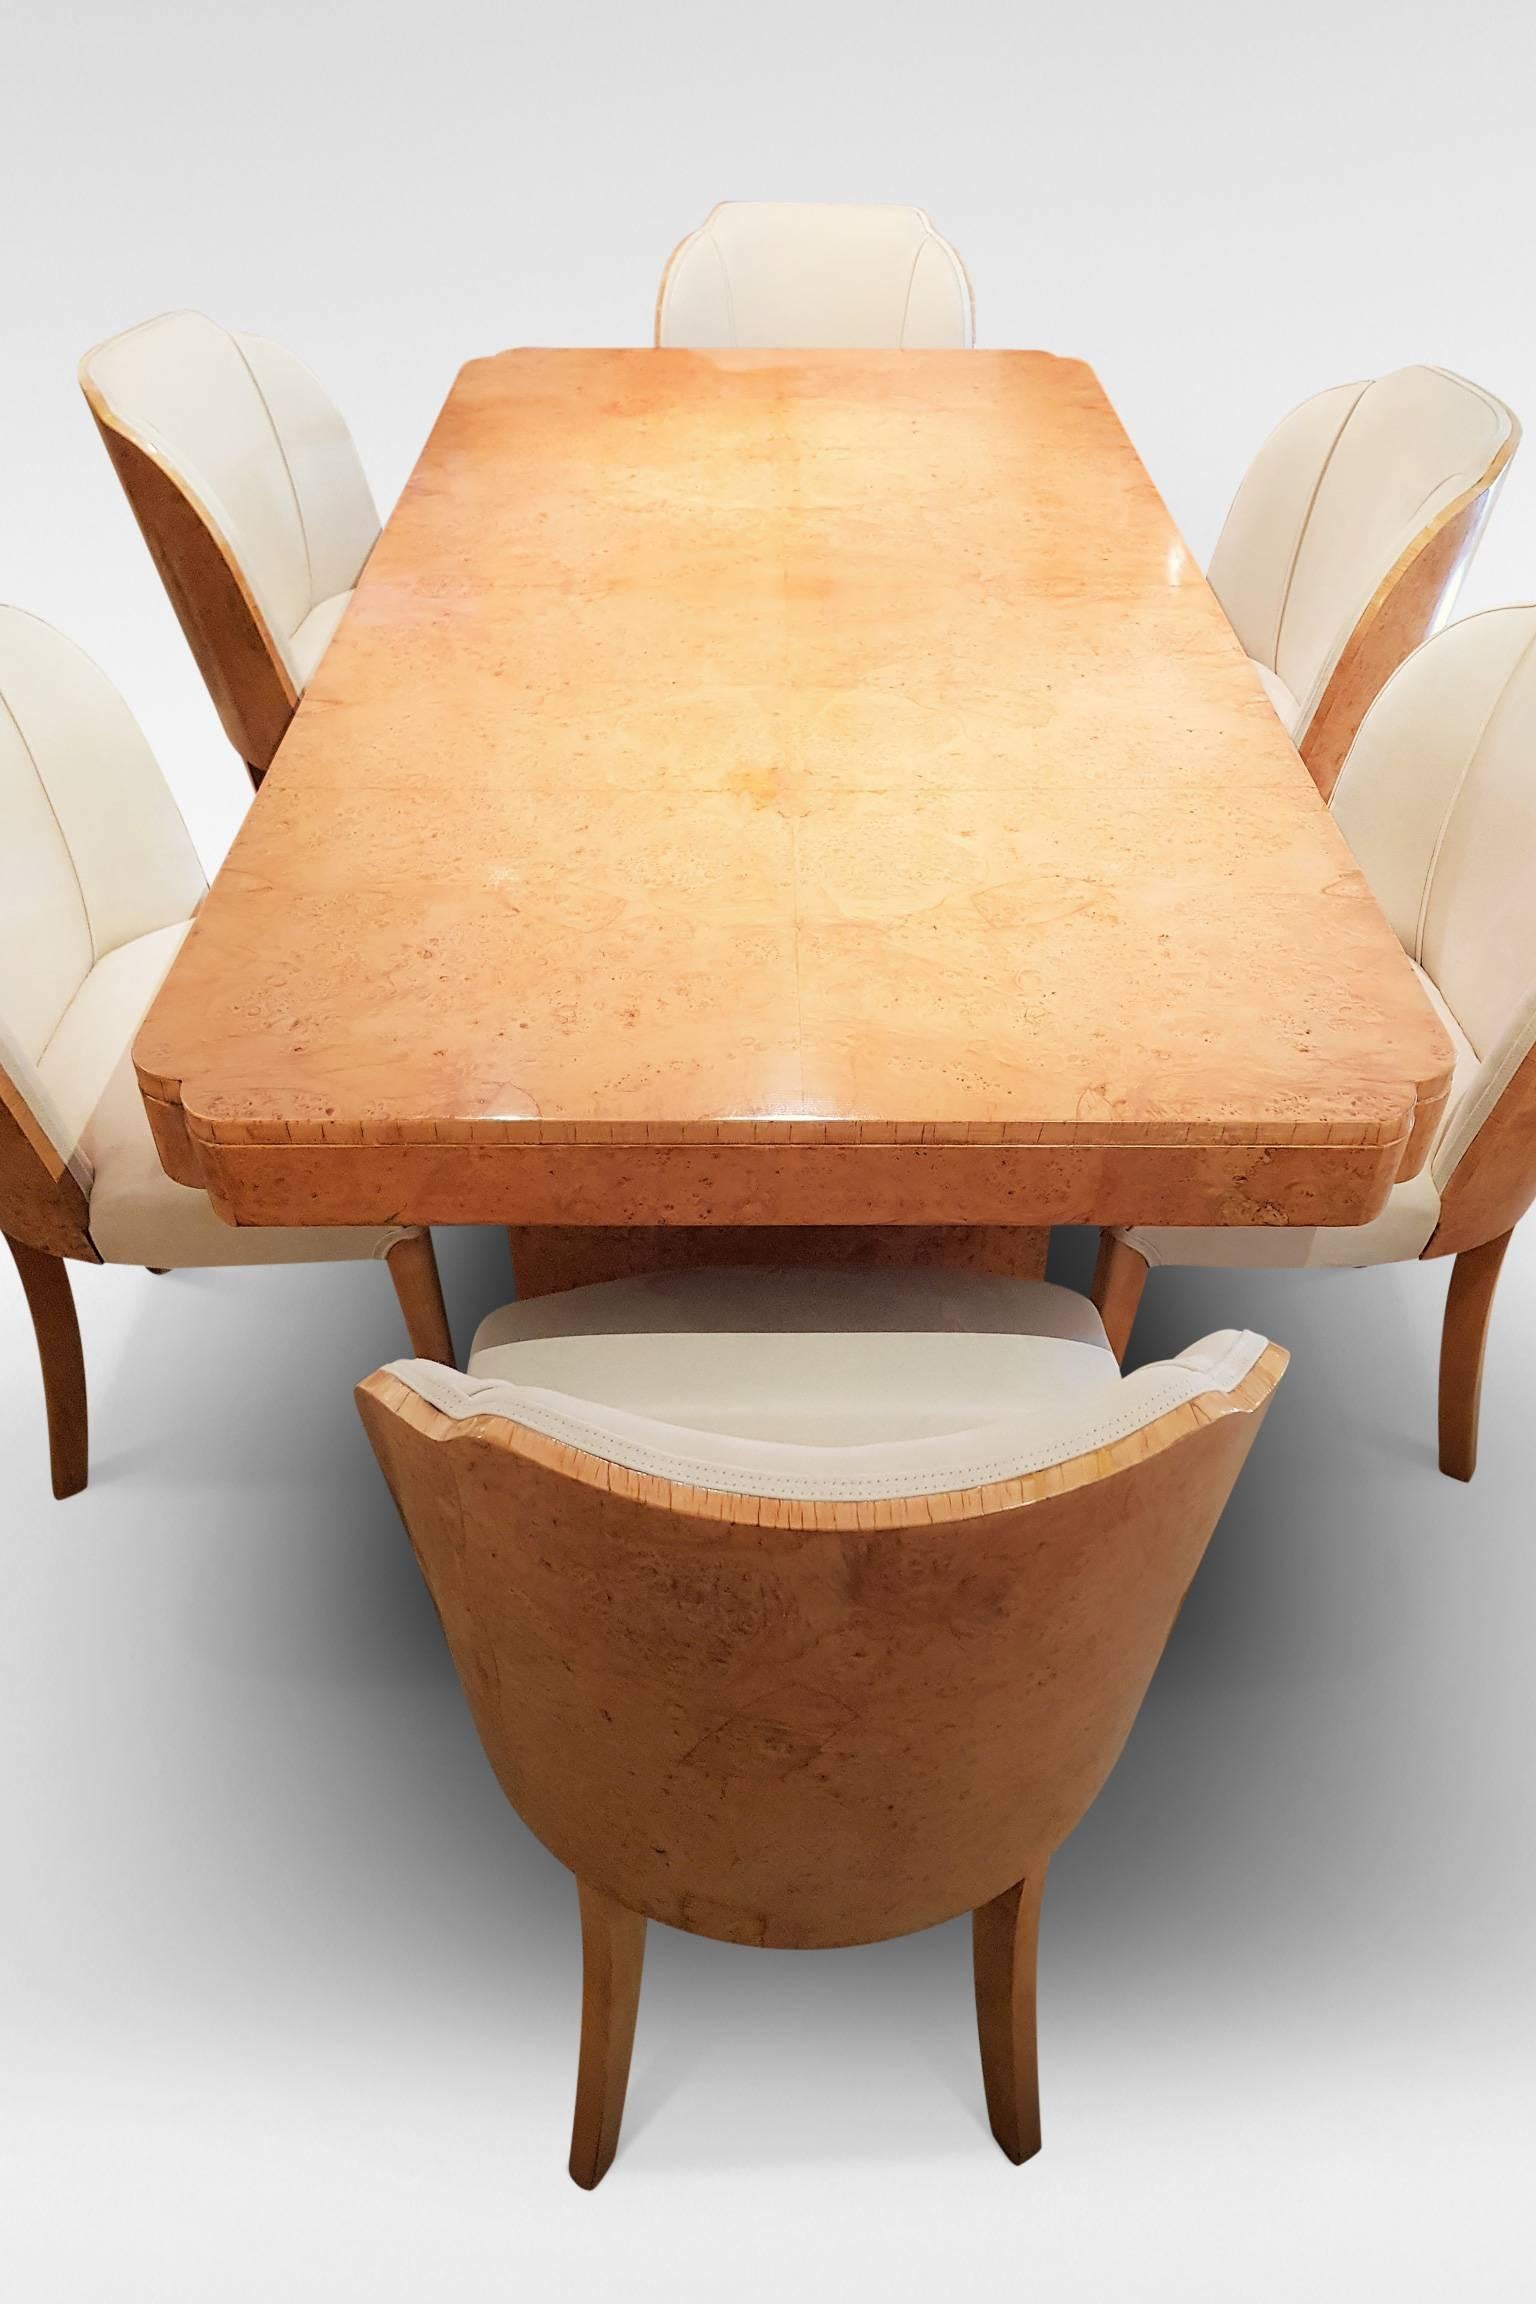 Veneer Original Art Deco Cloud Dining Table and Chairs by Epstein in Maple For Sale